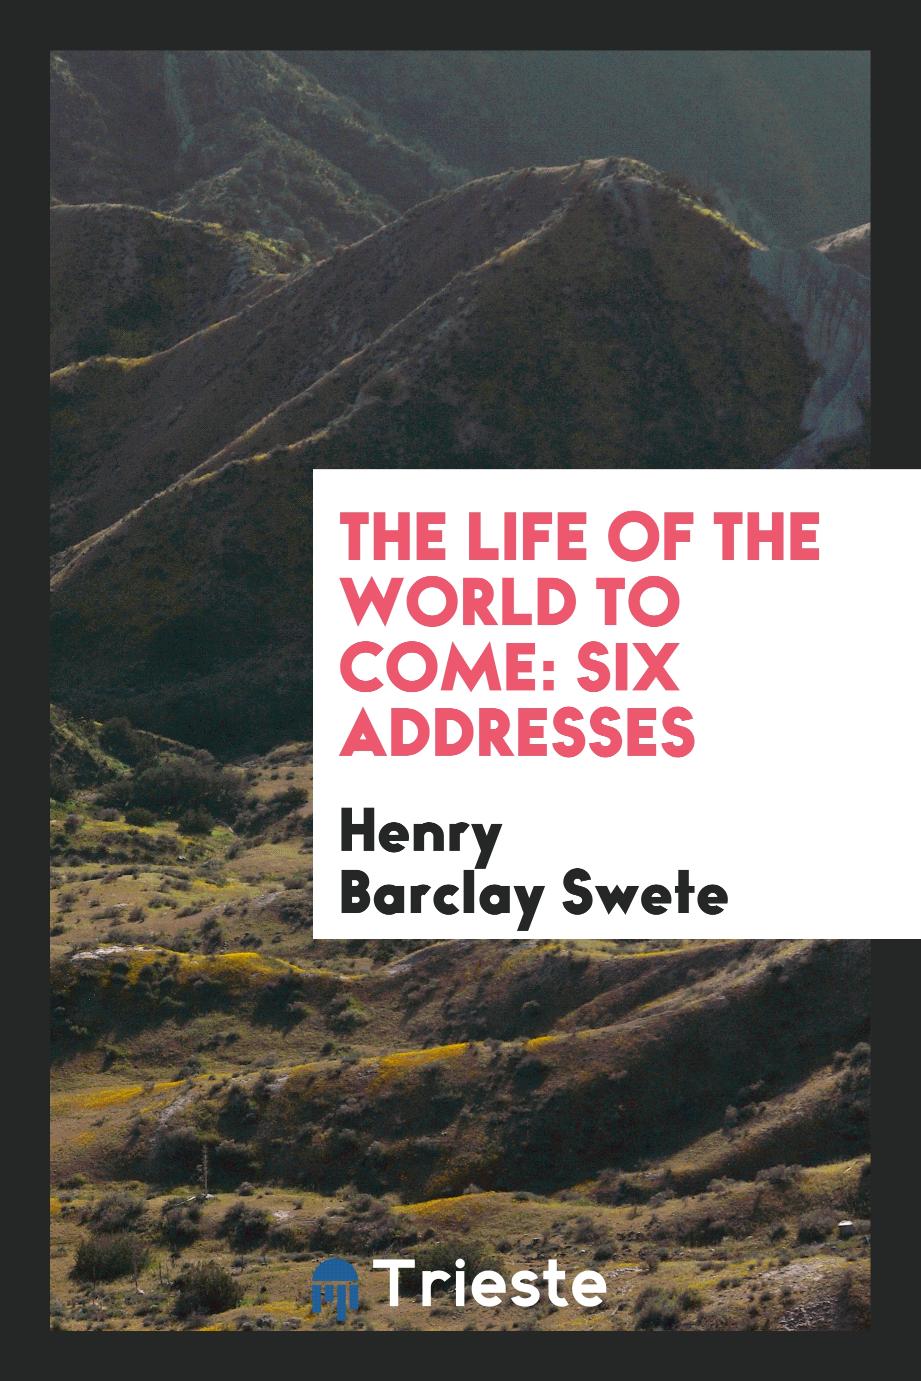 The Life of the World to Come: Six Addresses